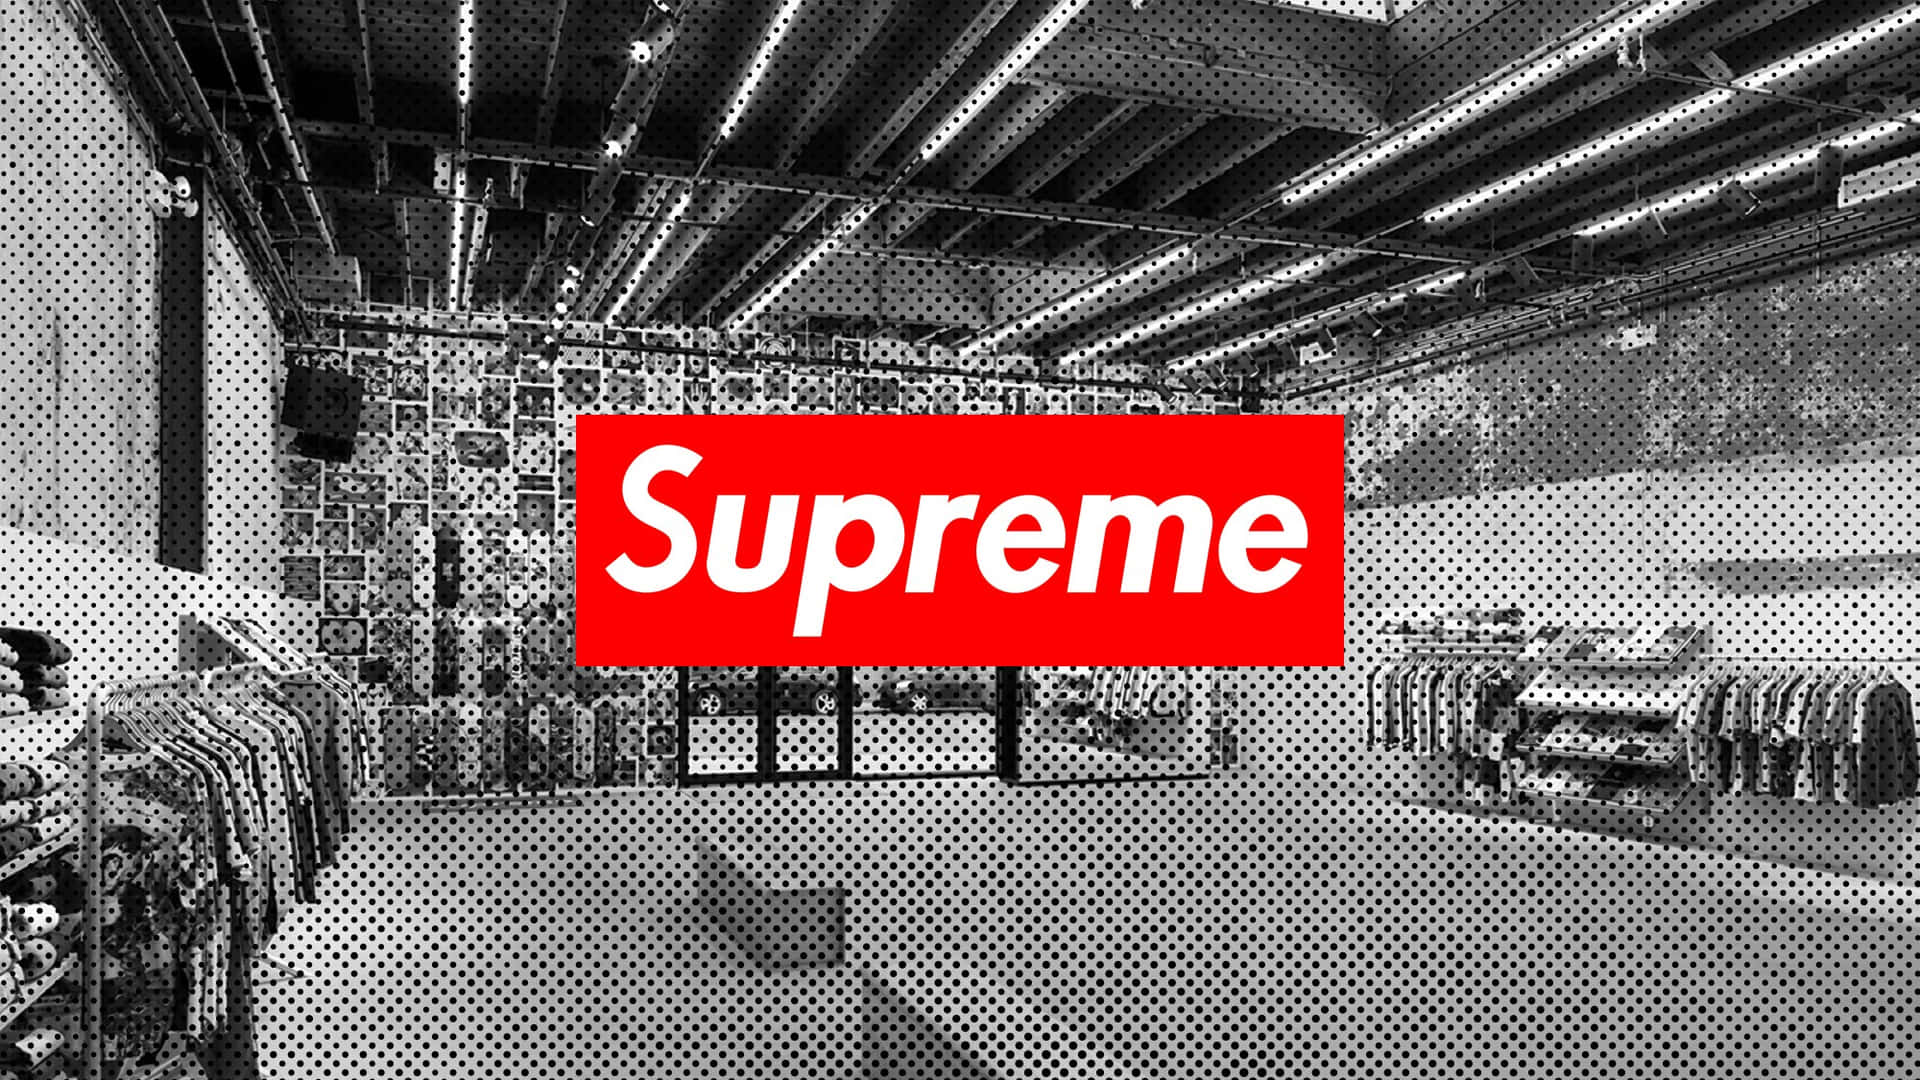 A Black And White Photo Of A Store With The Word Supreme On It